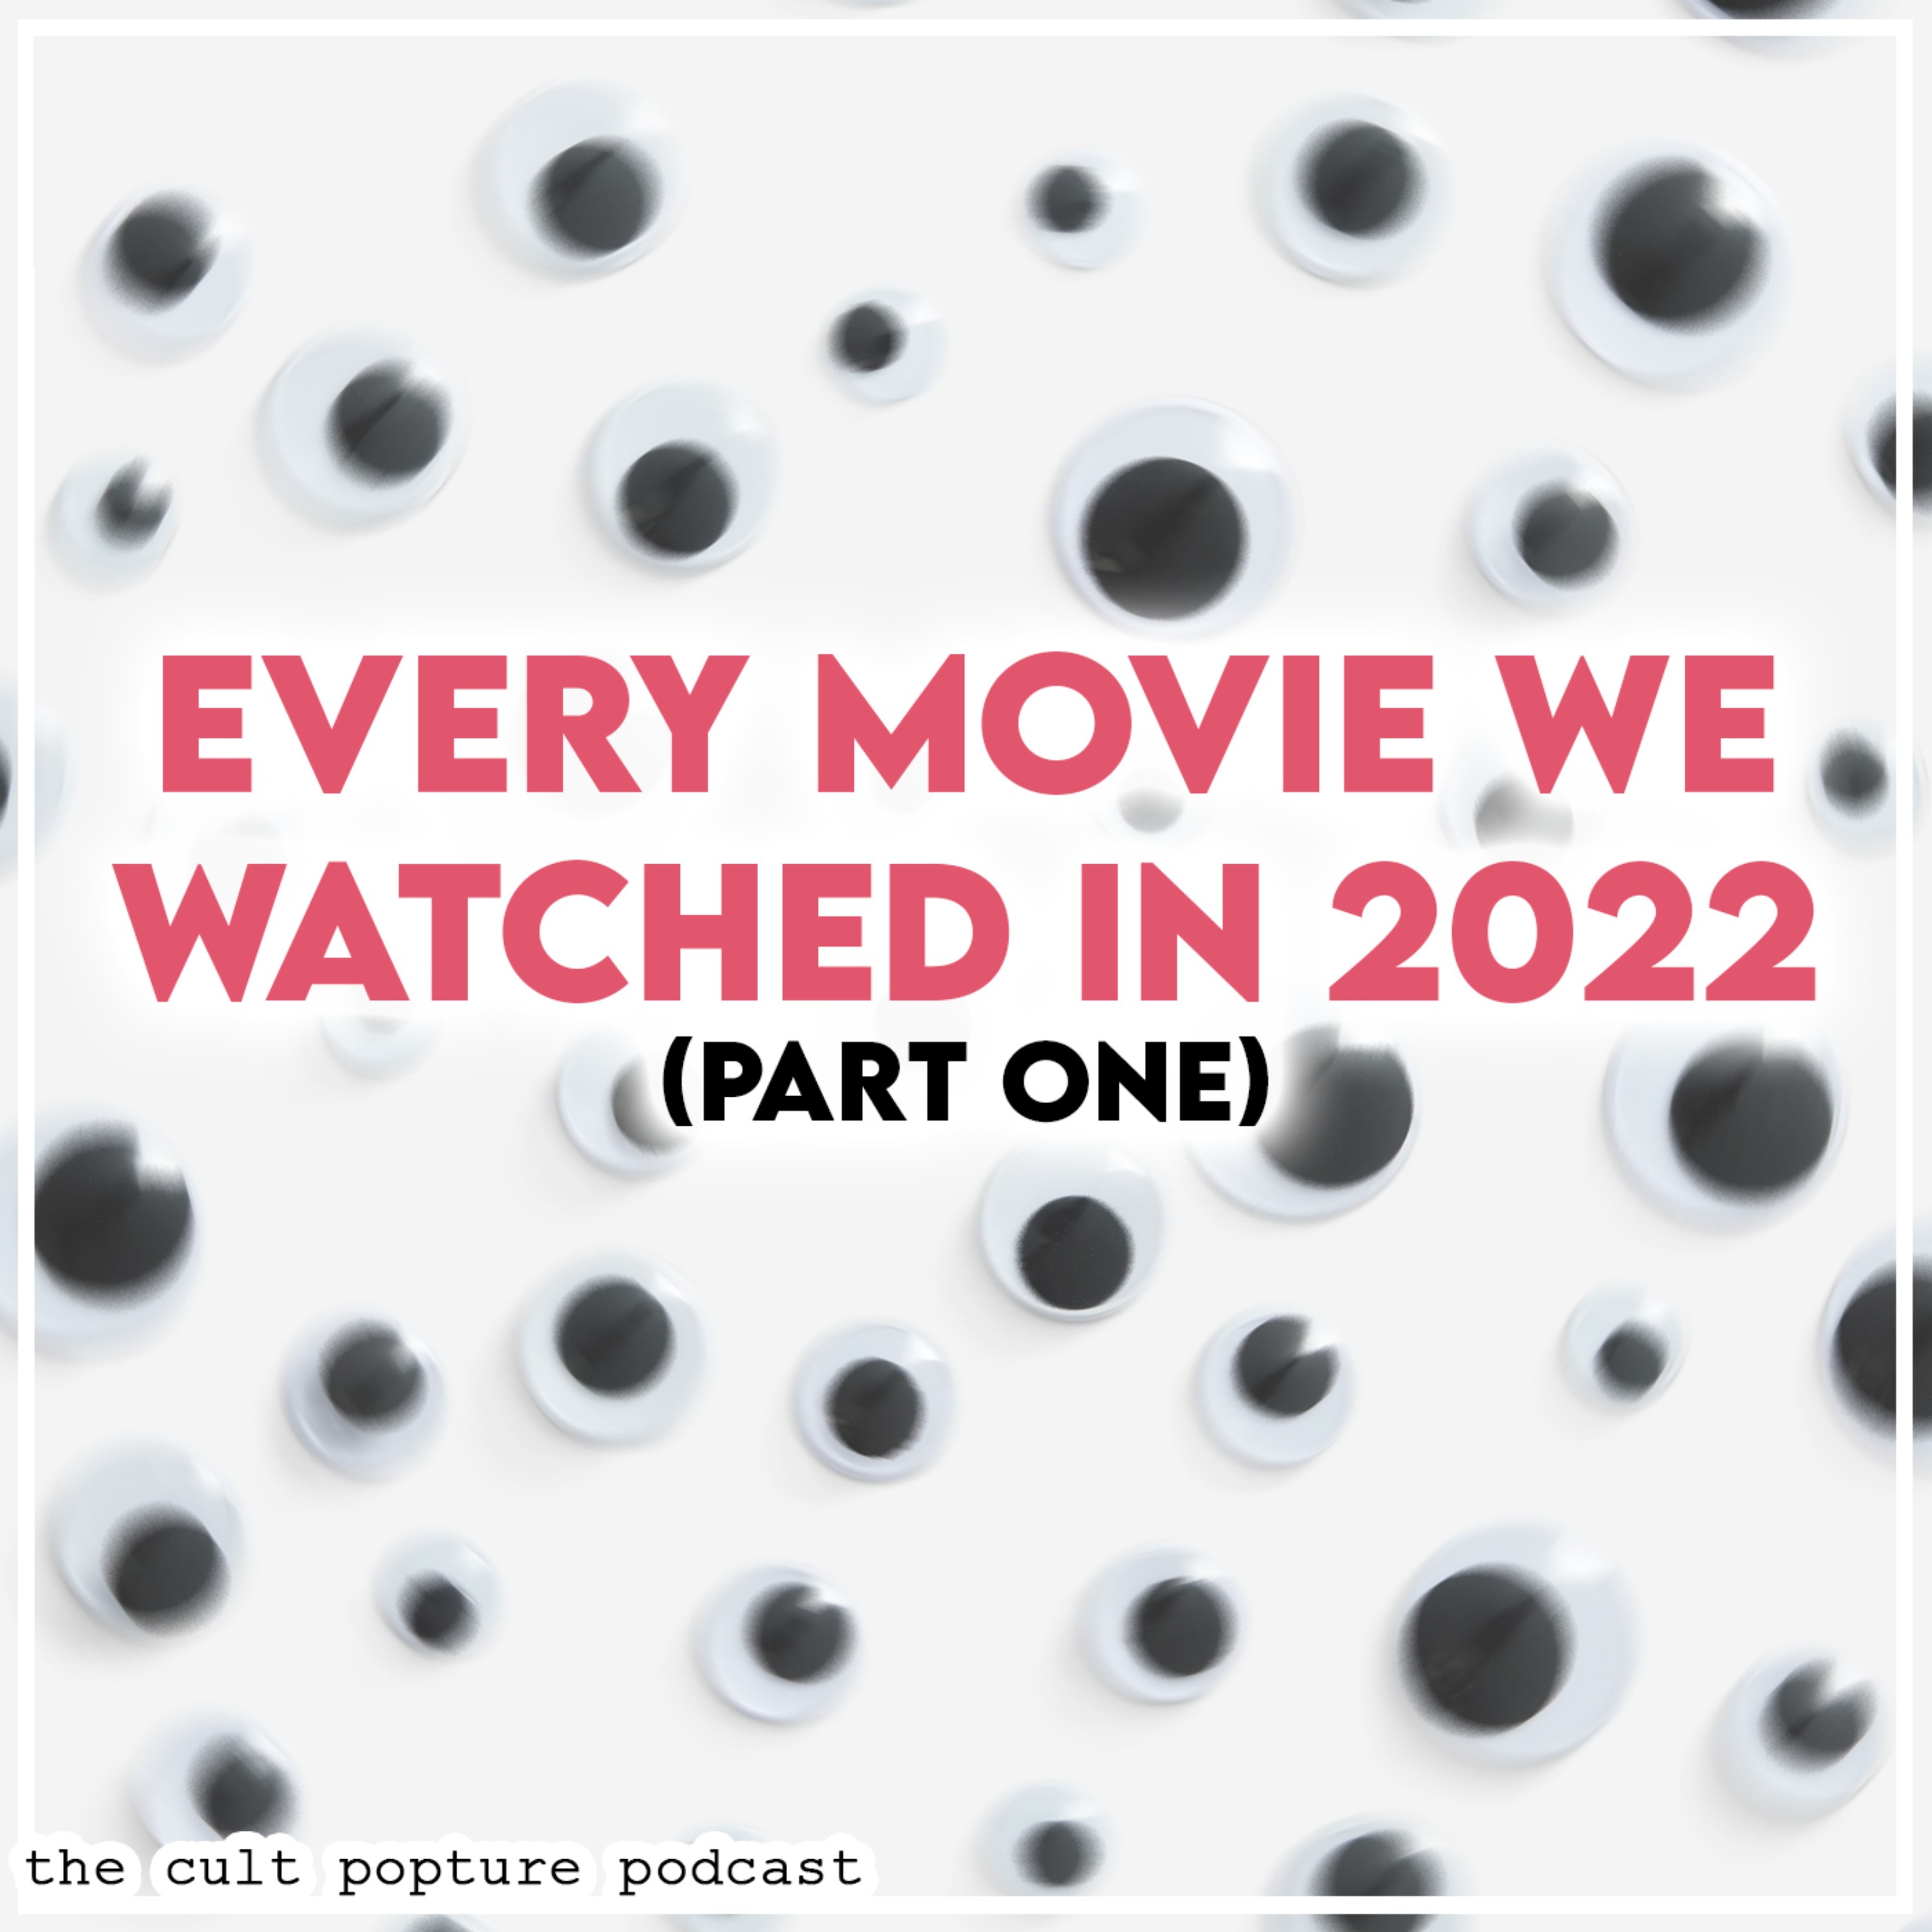 Every Movie We Watched in 2022 (Part One) | The Cult Popture Podcast